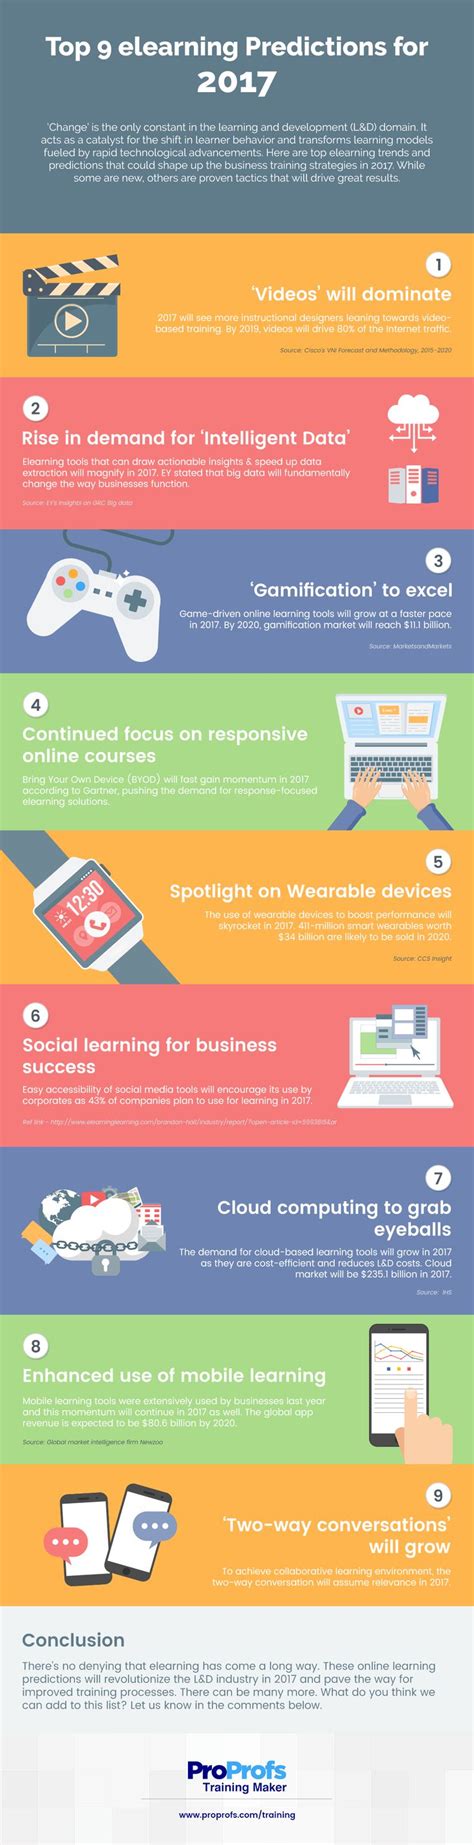 Top 9 Elearning Predictions For 2017 Infographic E Learning